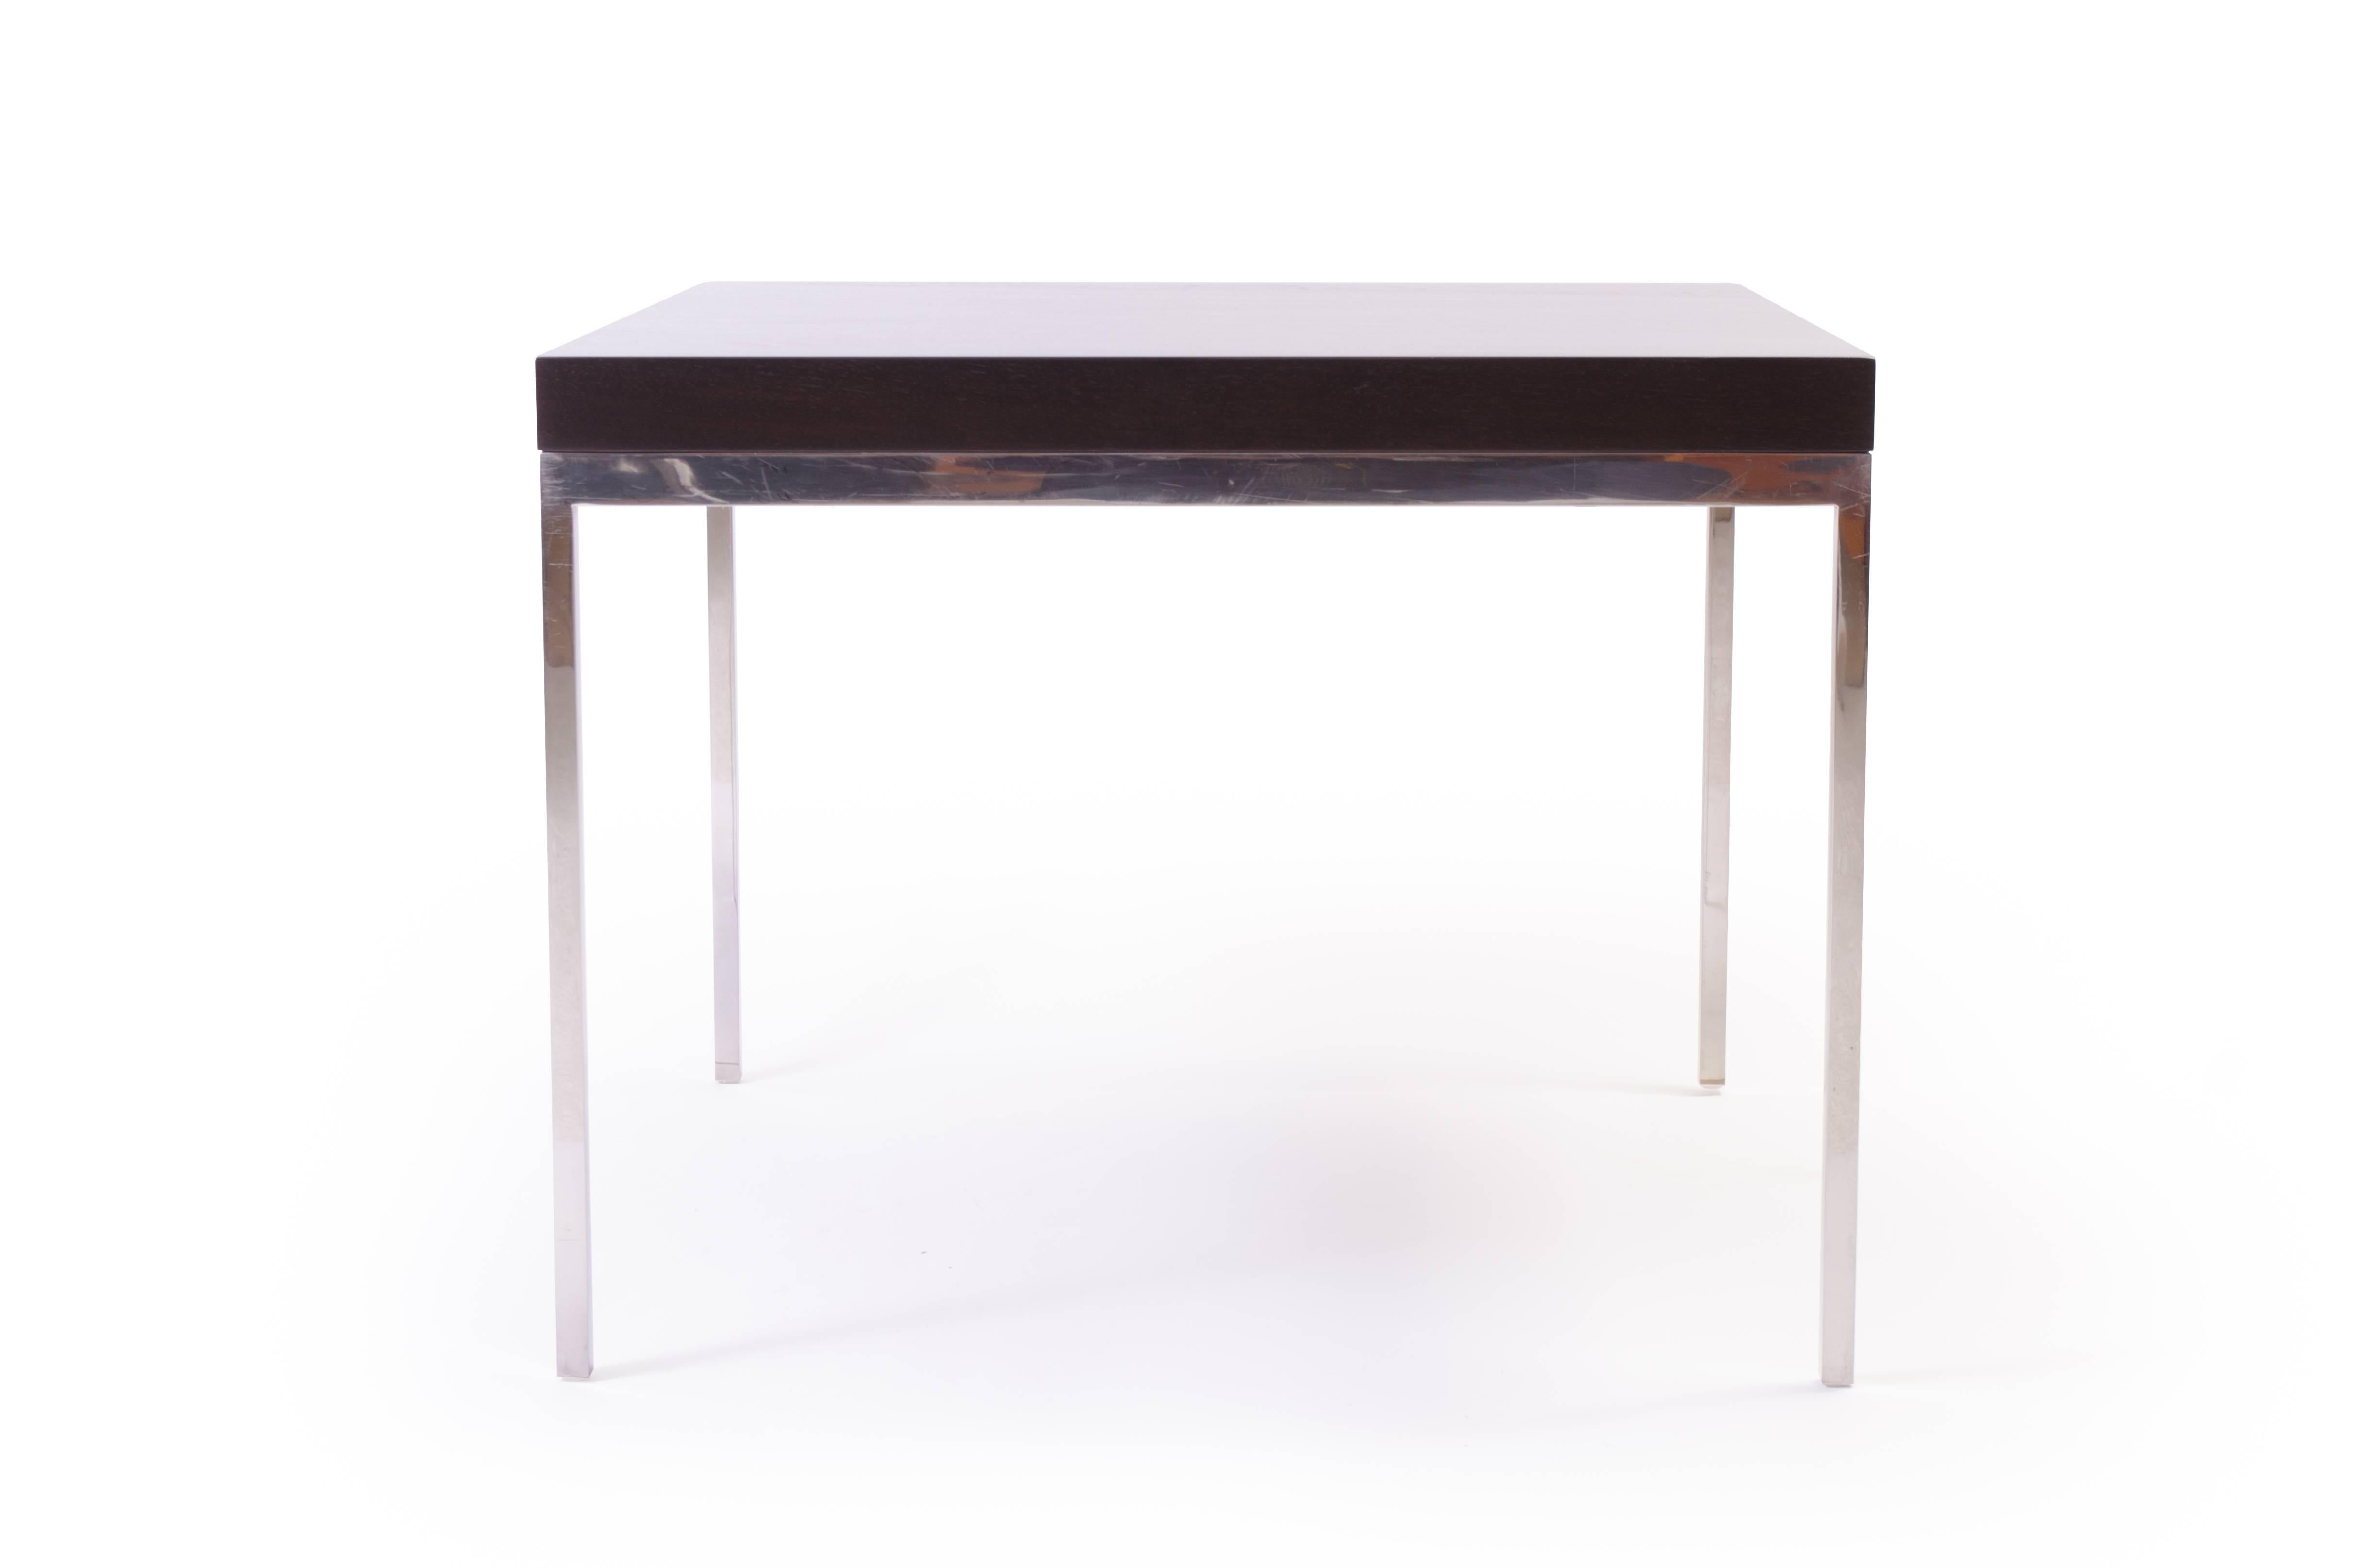 A powerful modernist design using the best materials. A solid plinth of walnut wood with a deep ebony stain mounted atop a sleek solid stainless steel frame. The piece is proportionally delicate and structurally heavy, incredible quality. Perfect